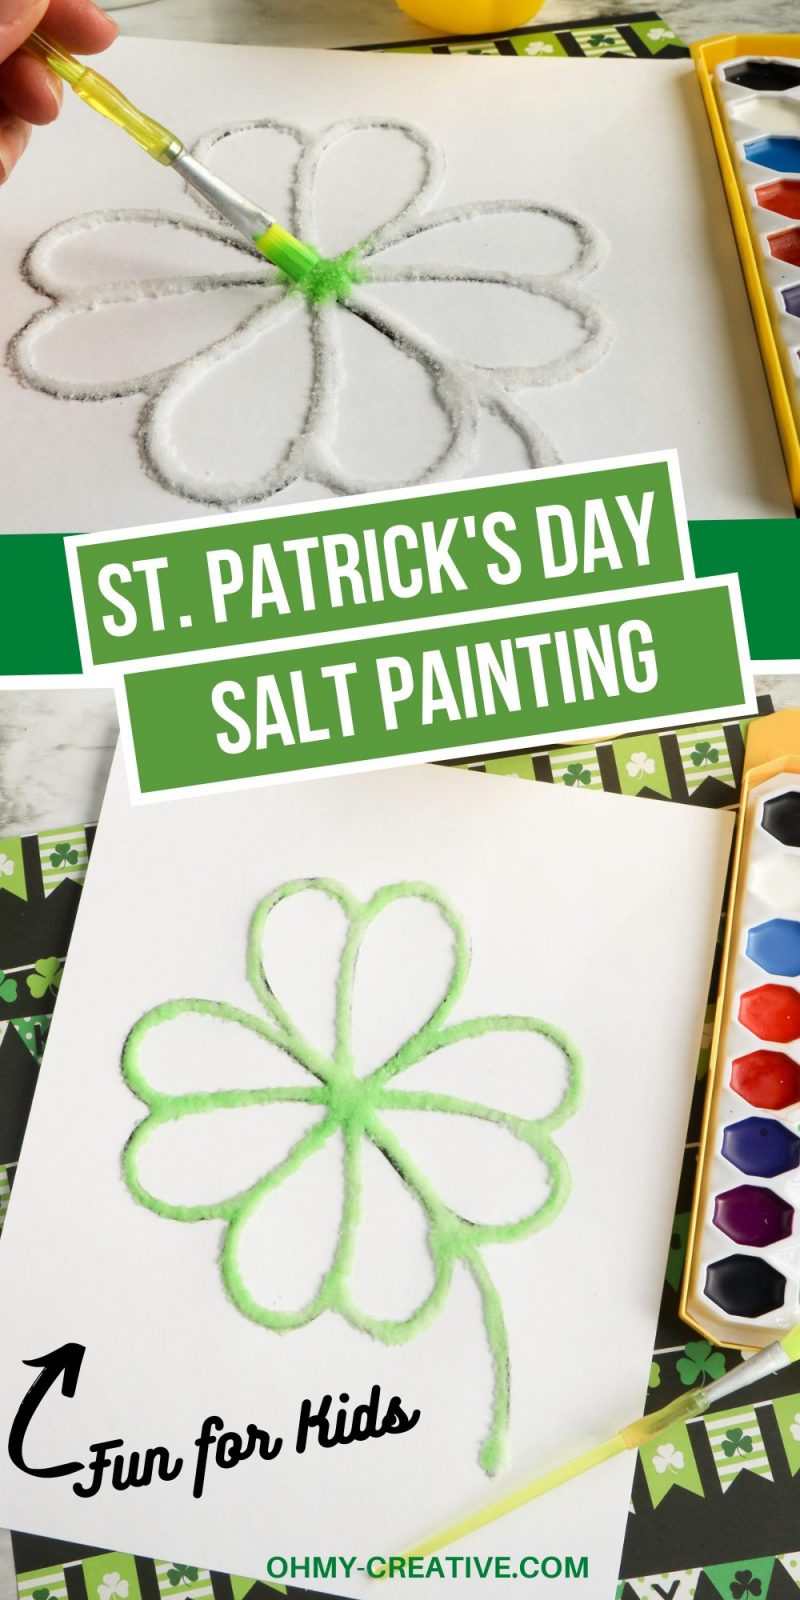 Print this free shamrock template and use watercolors and salt to create a green shamrock for St. Patrick's Day.